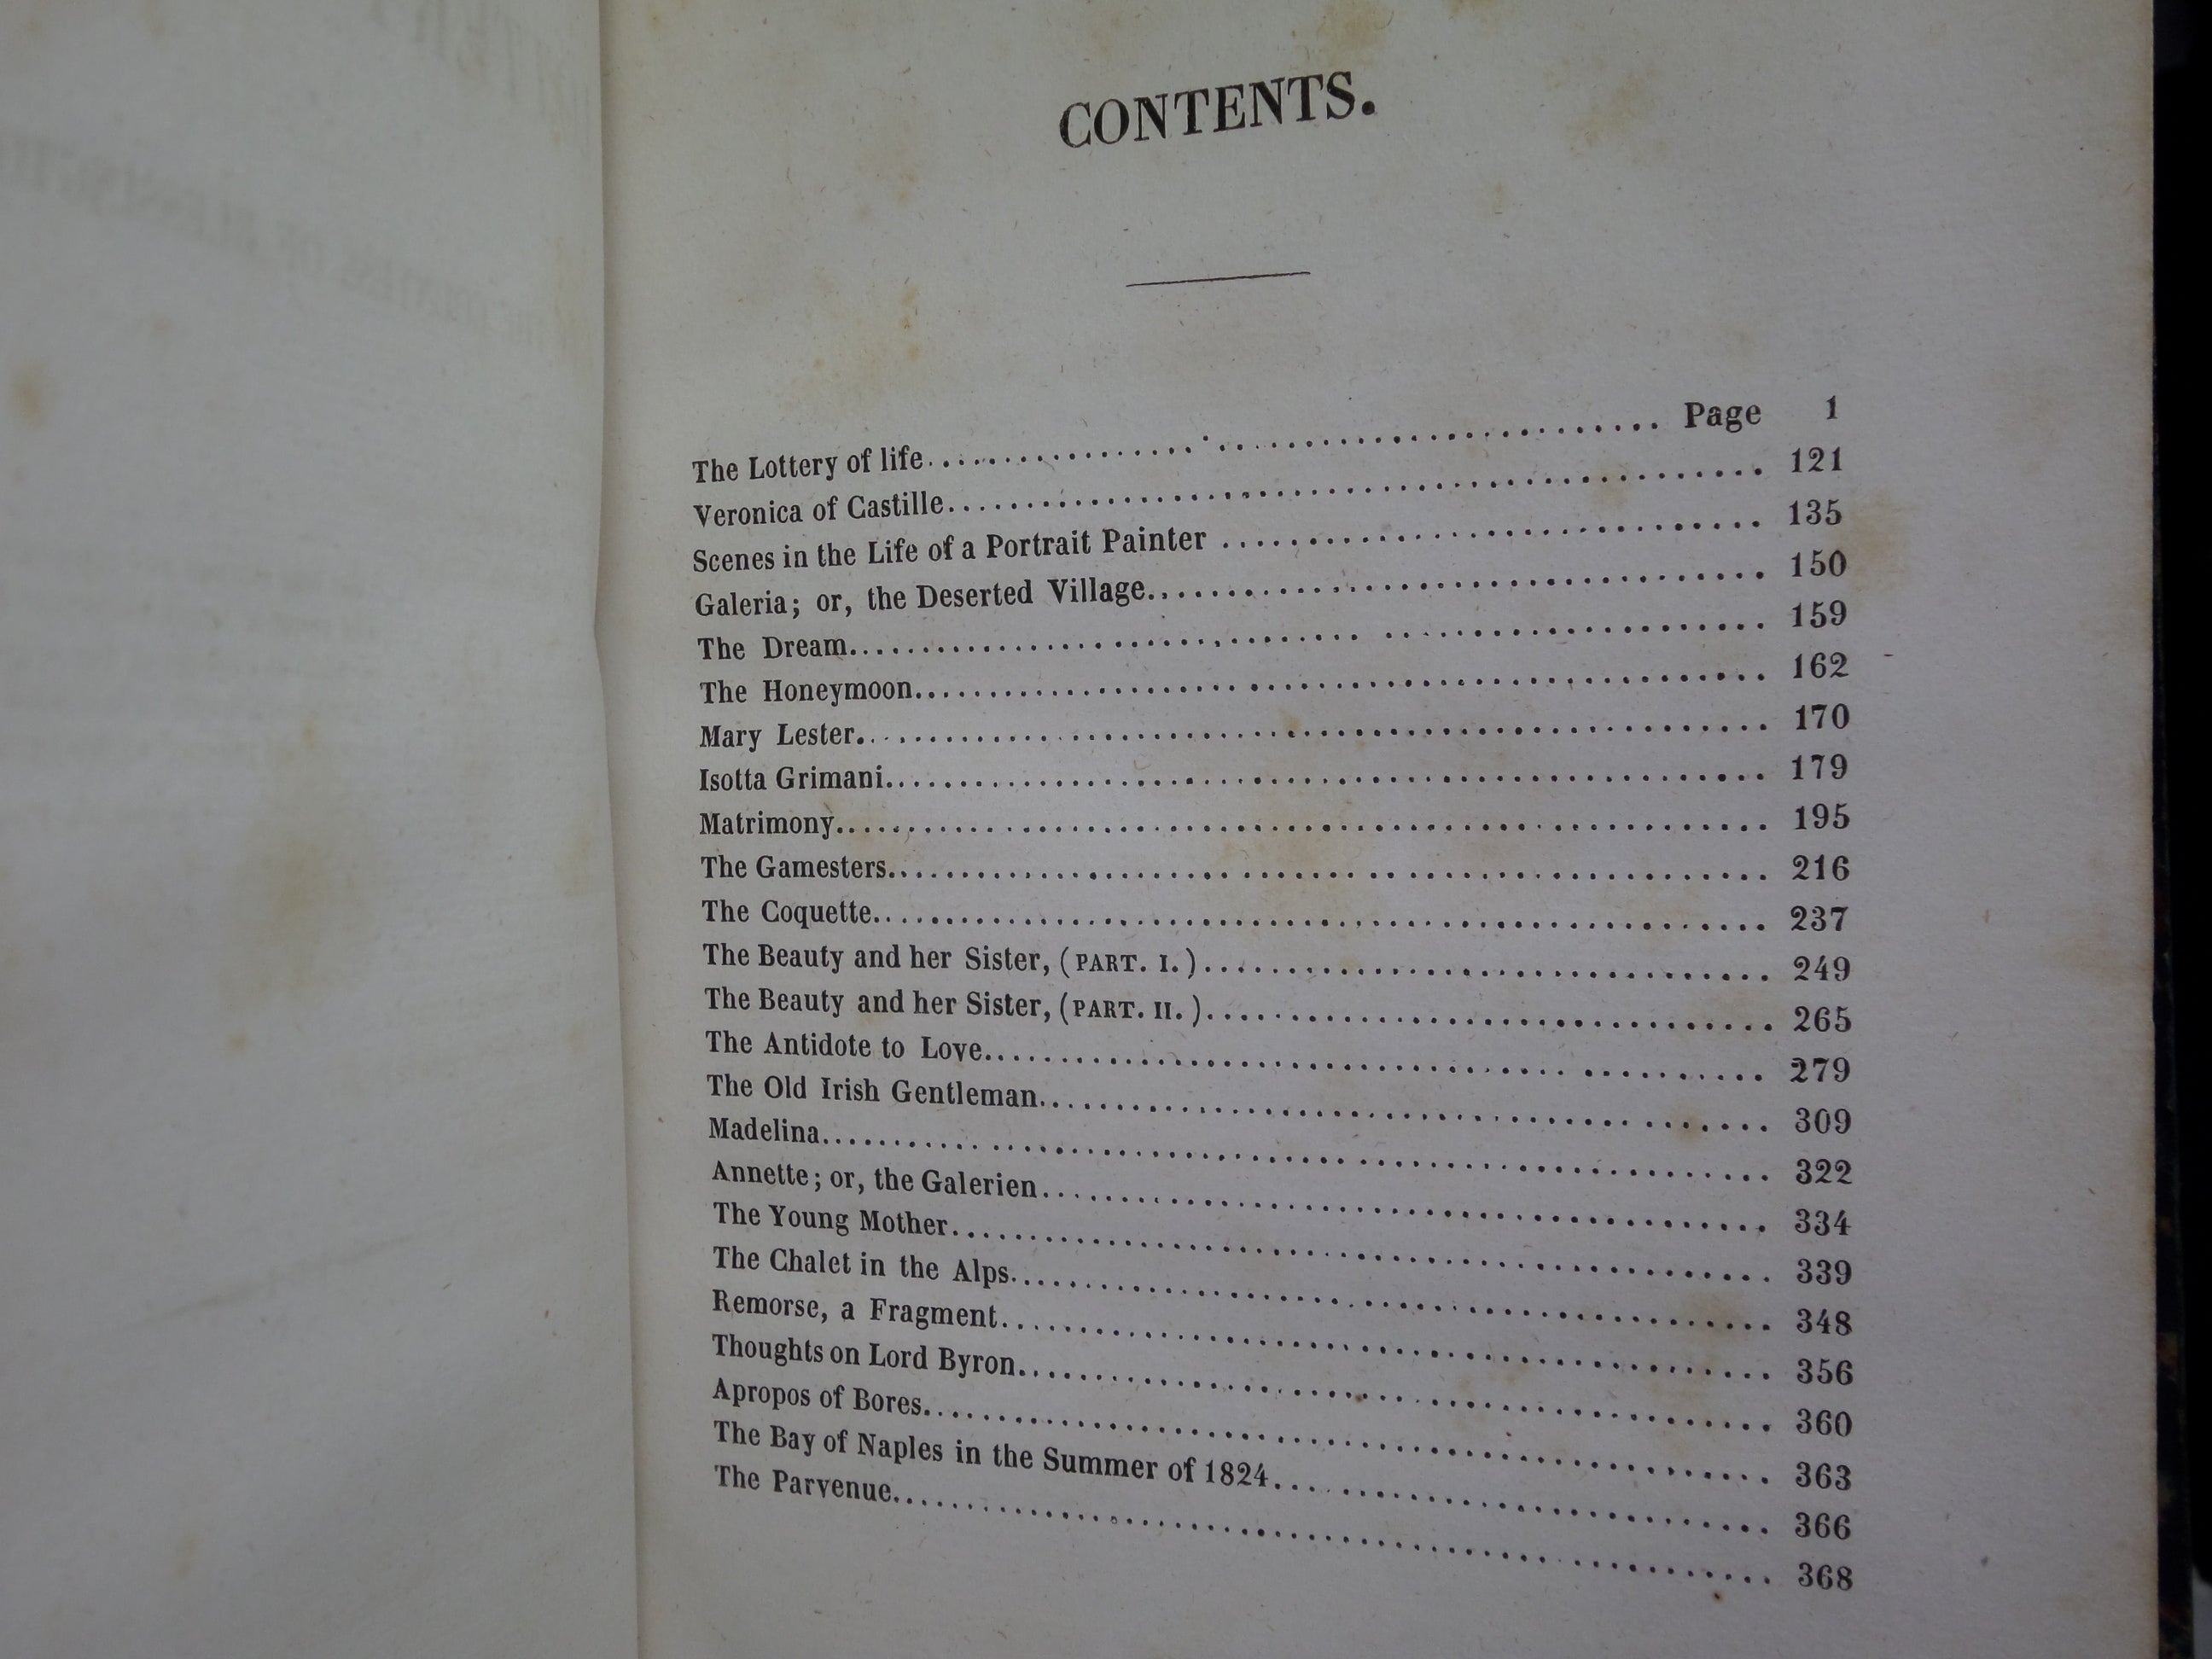 THE LOTTERY OF LIFE BY THE COUNTESS BLESSINGTON 1842 FIRST EDITION